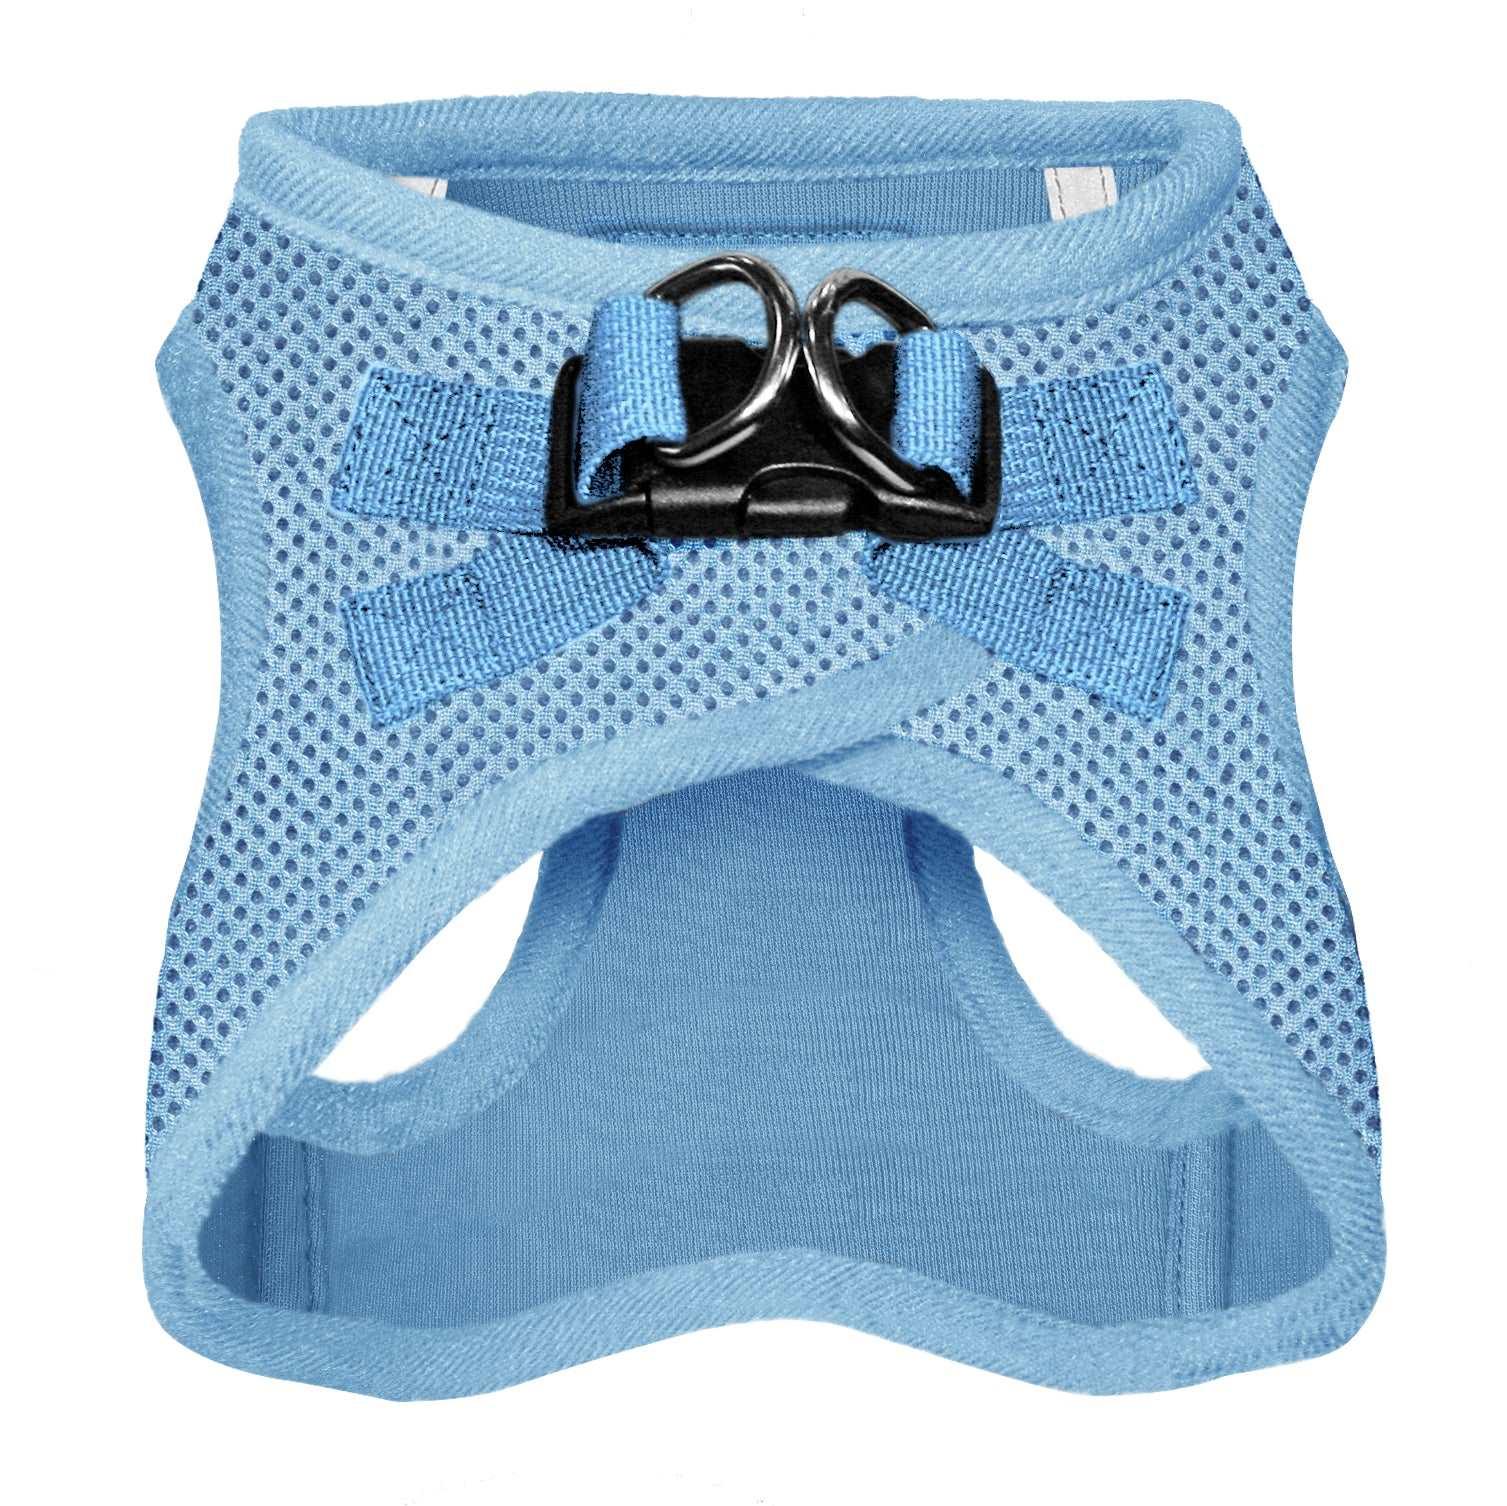 VOYAGER Step-In Air Pet Harness in Baby Blue with Matching Trim and Webbing - Black